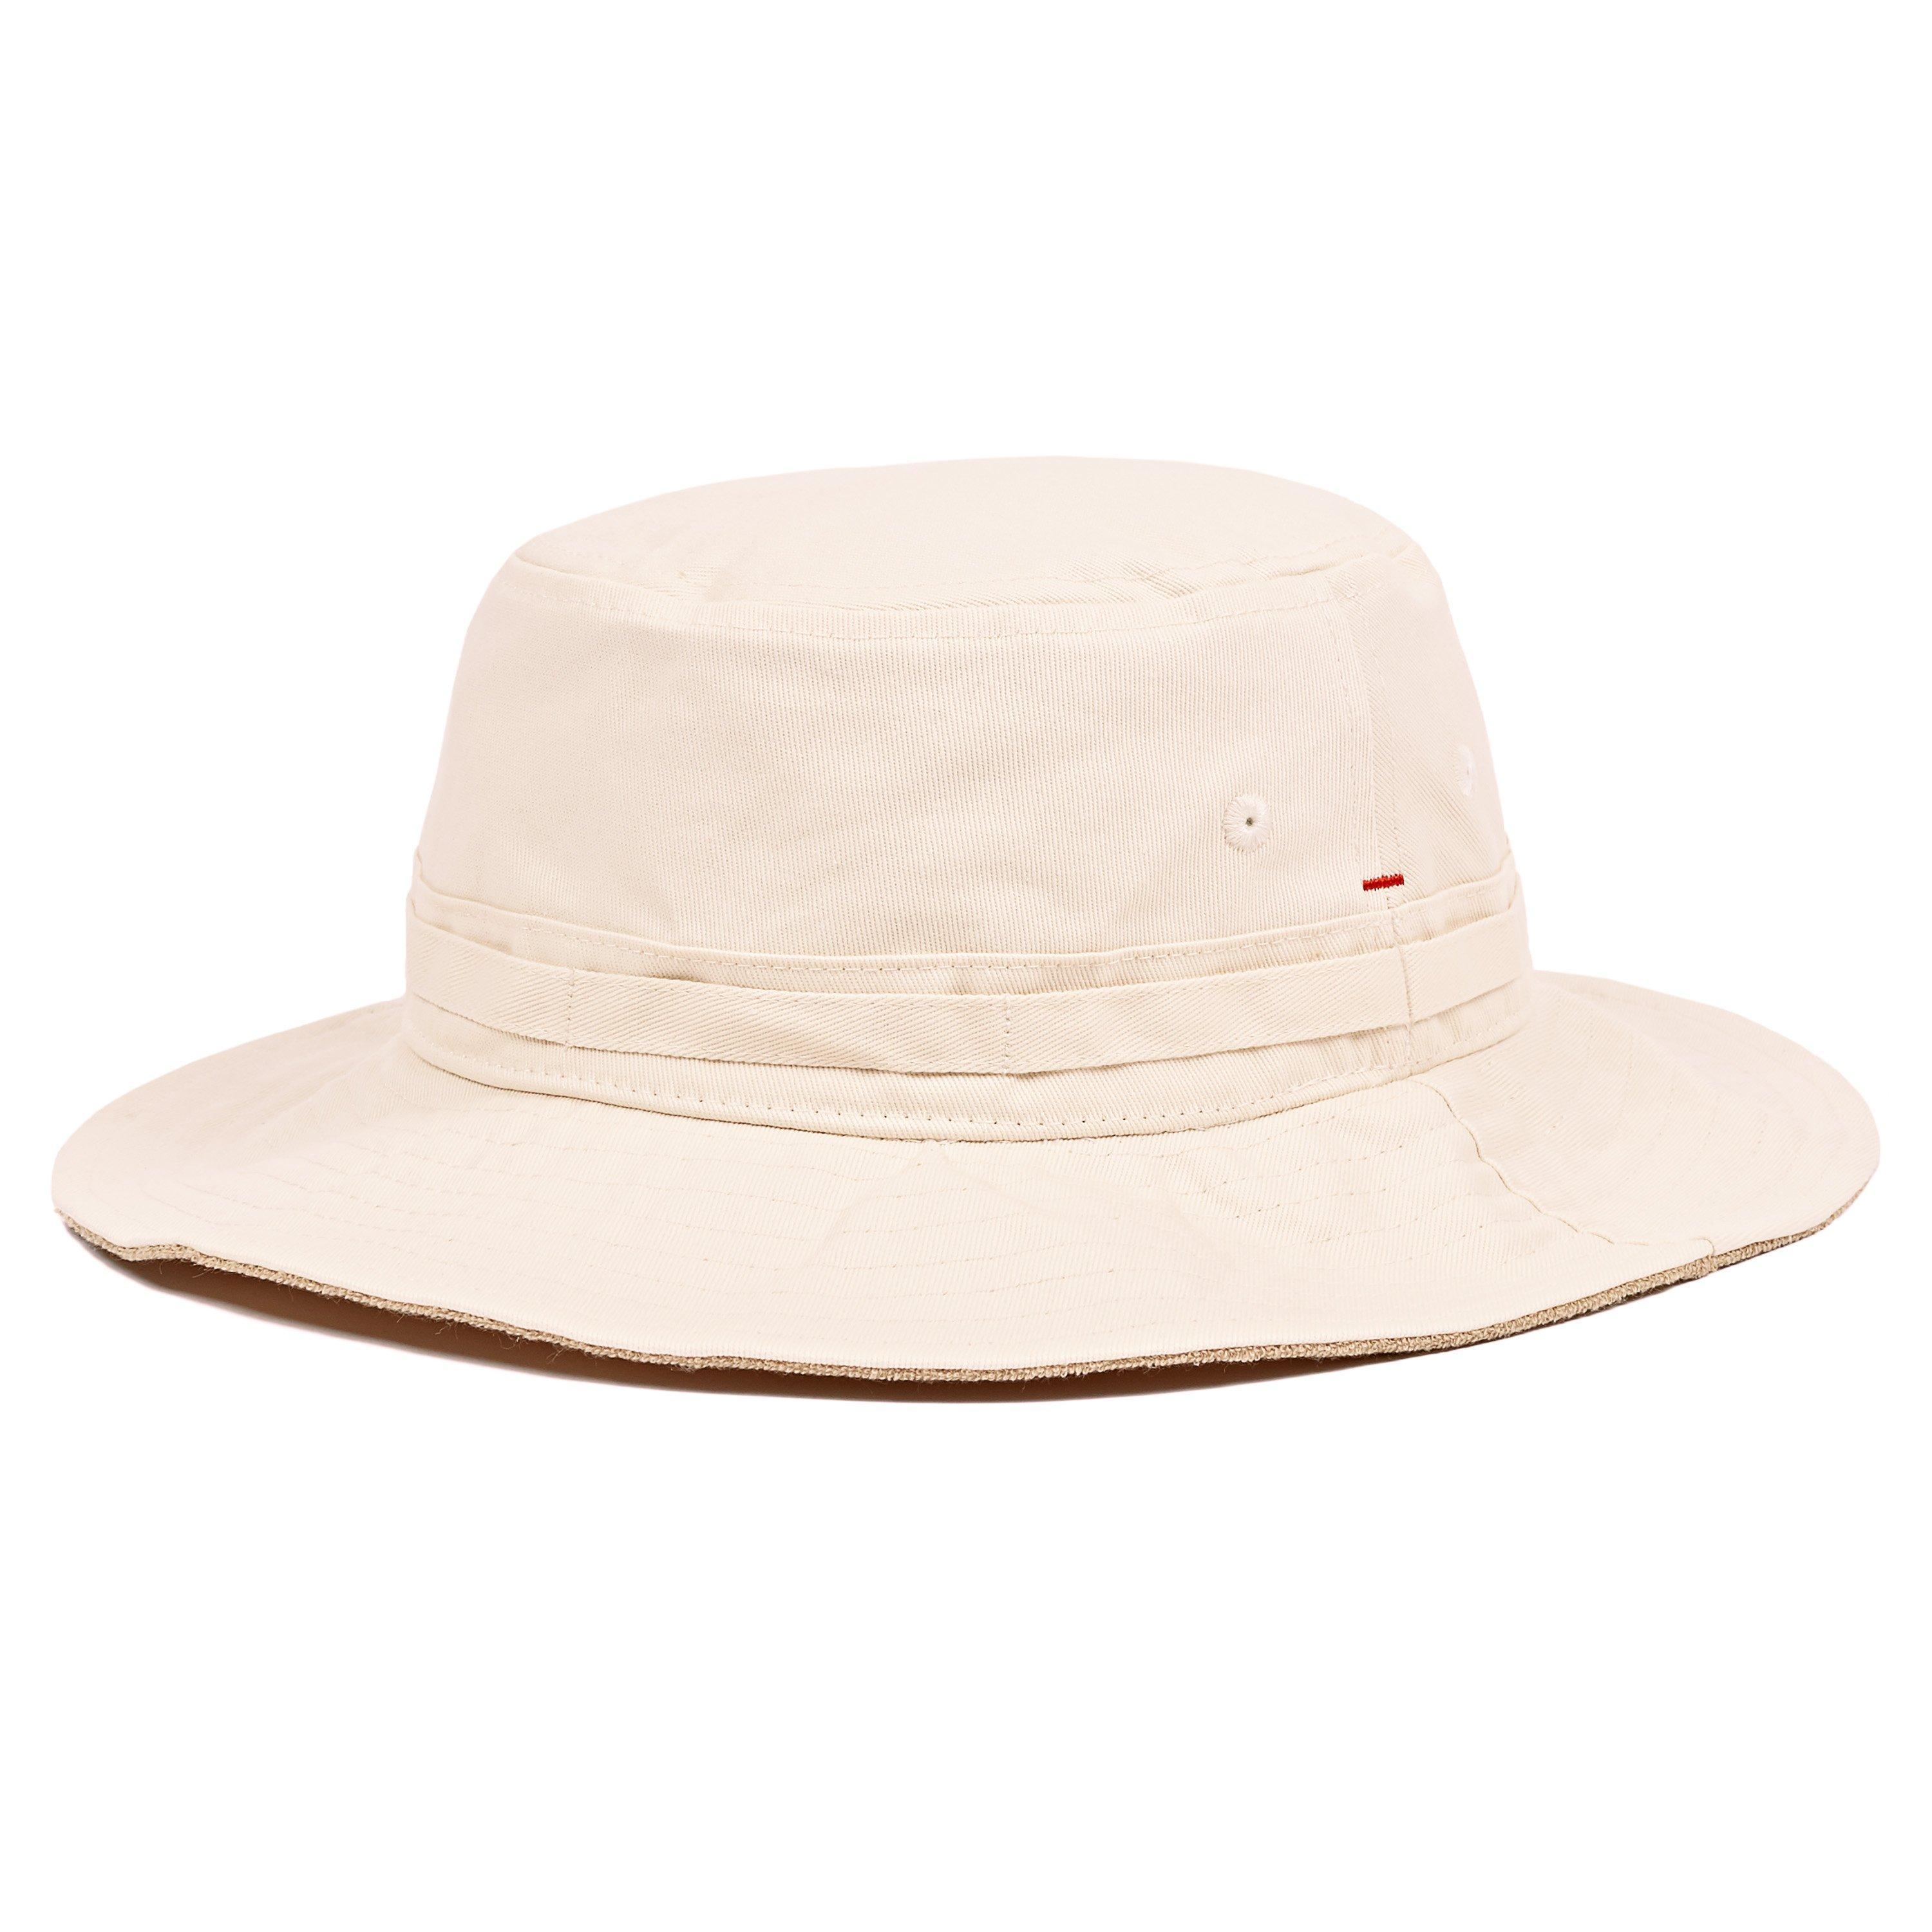 Orlebar Brown Cotton Stone Reversible Boonie Hat in Natural for Men - Lyst